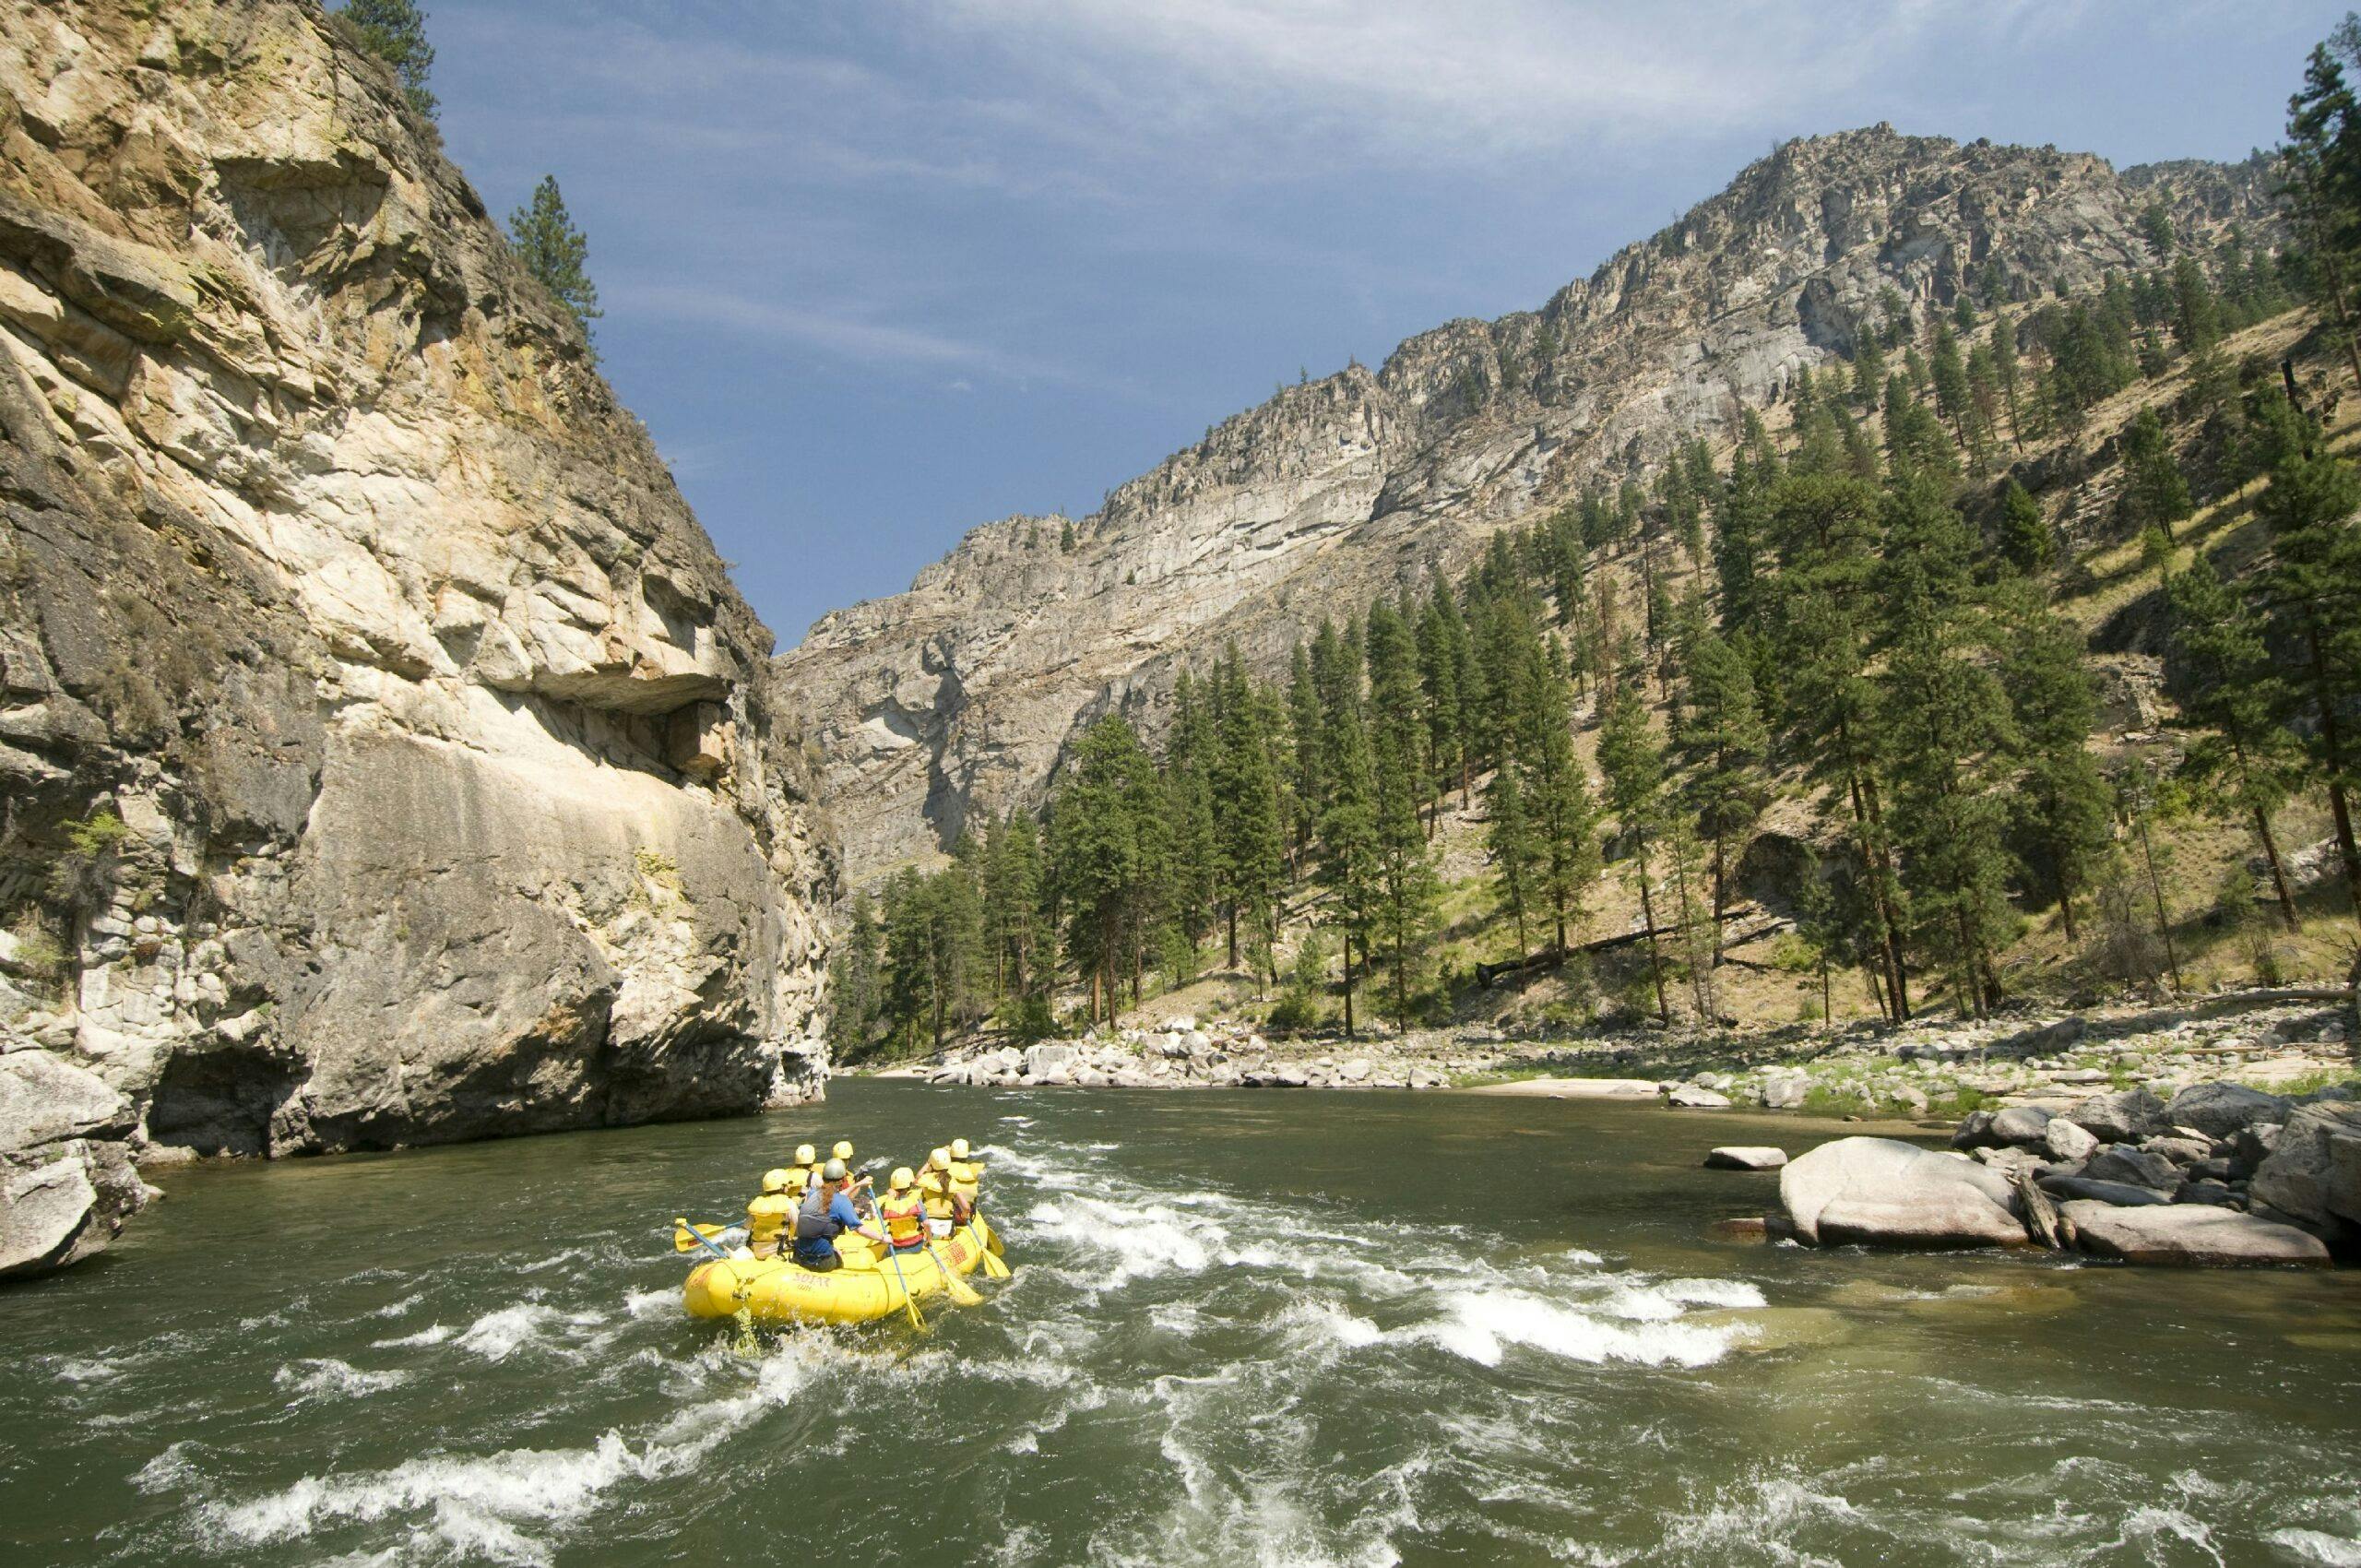 Rafting on the Middle Fork of the Salmon River with MT Sobek